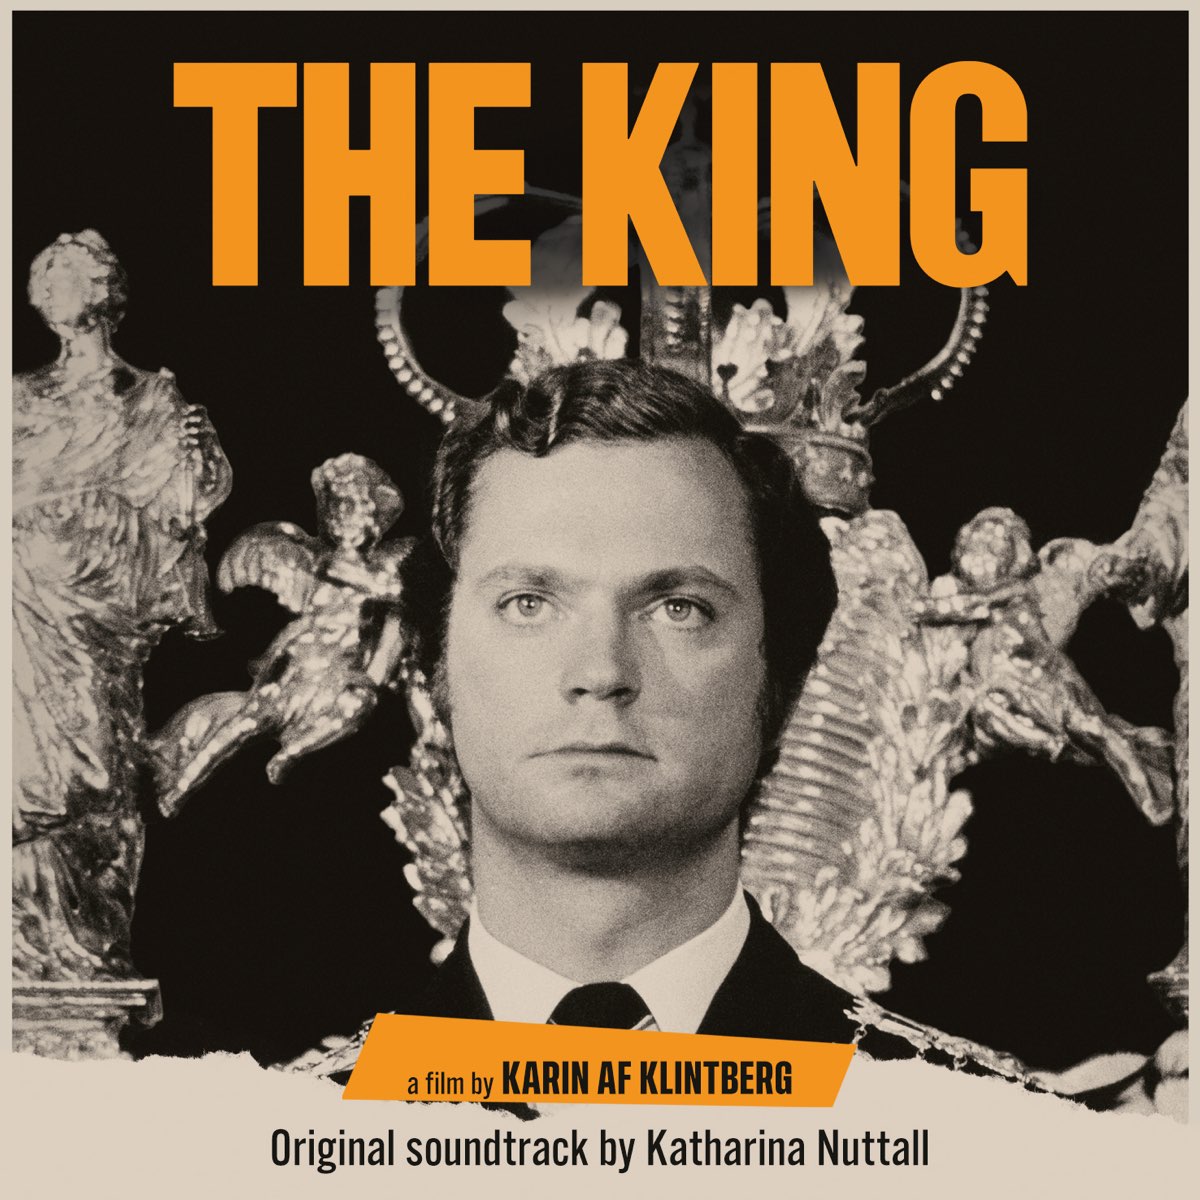 An album cover featuring a young King Carl XVI Gustaf, sitting on a throne with a serious gaze. The King – a film by Karin af Klintberg. Original soundtrack by Katharina Nuttall.